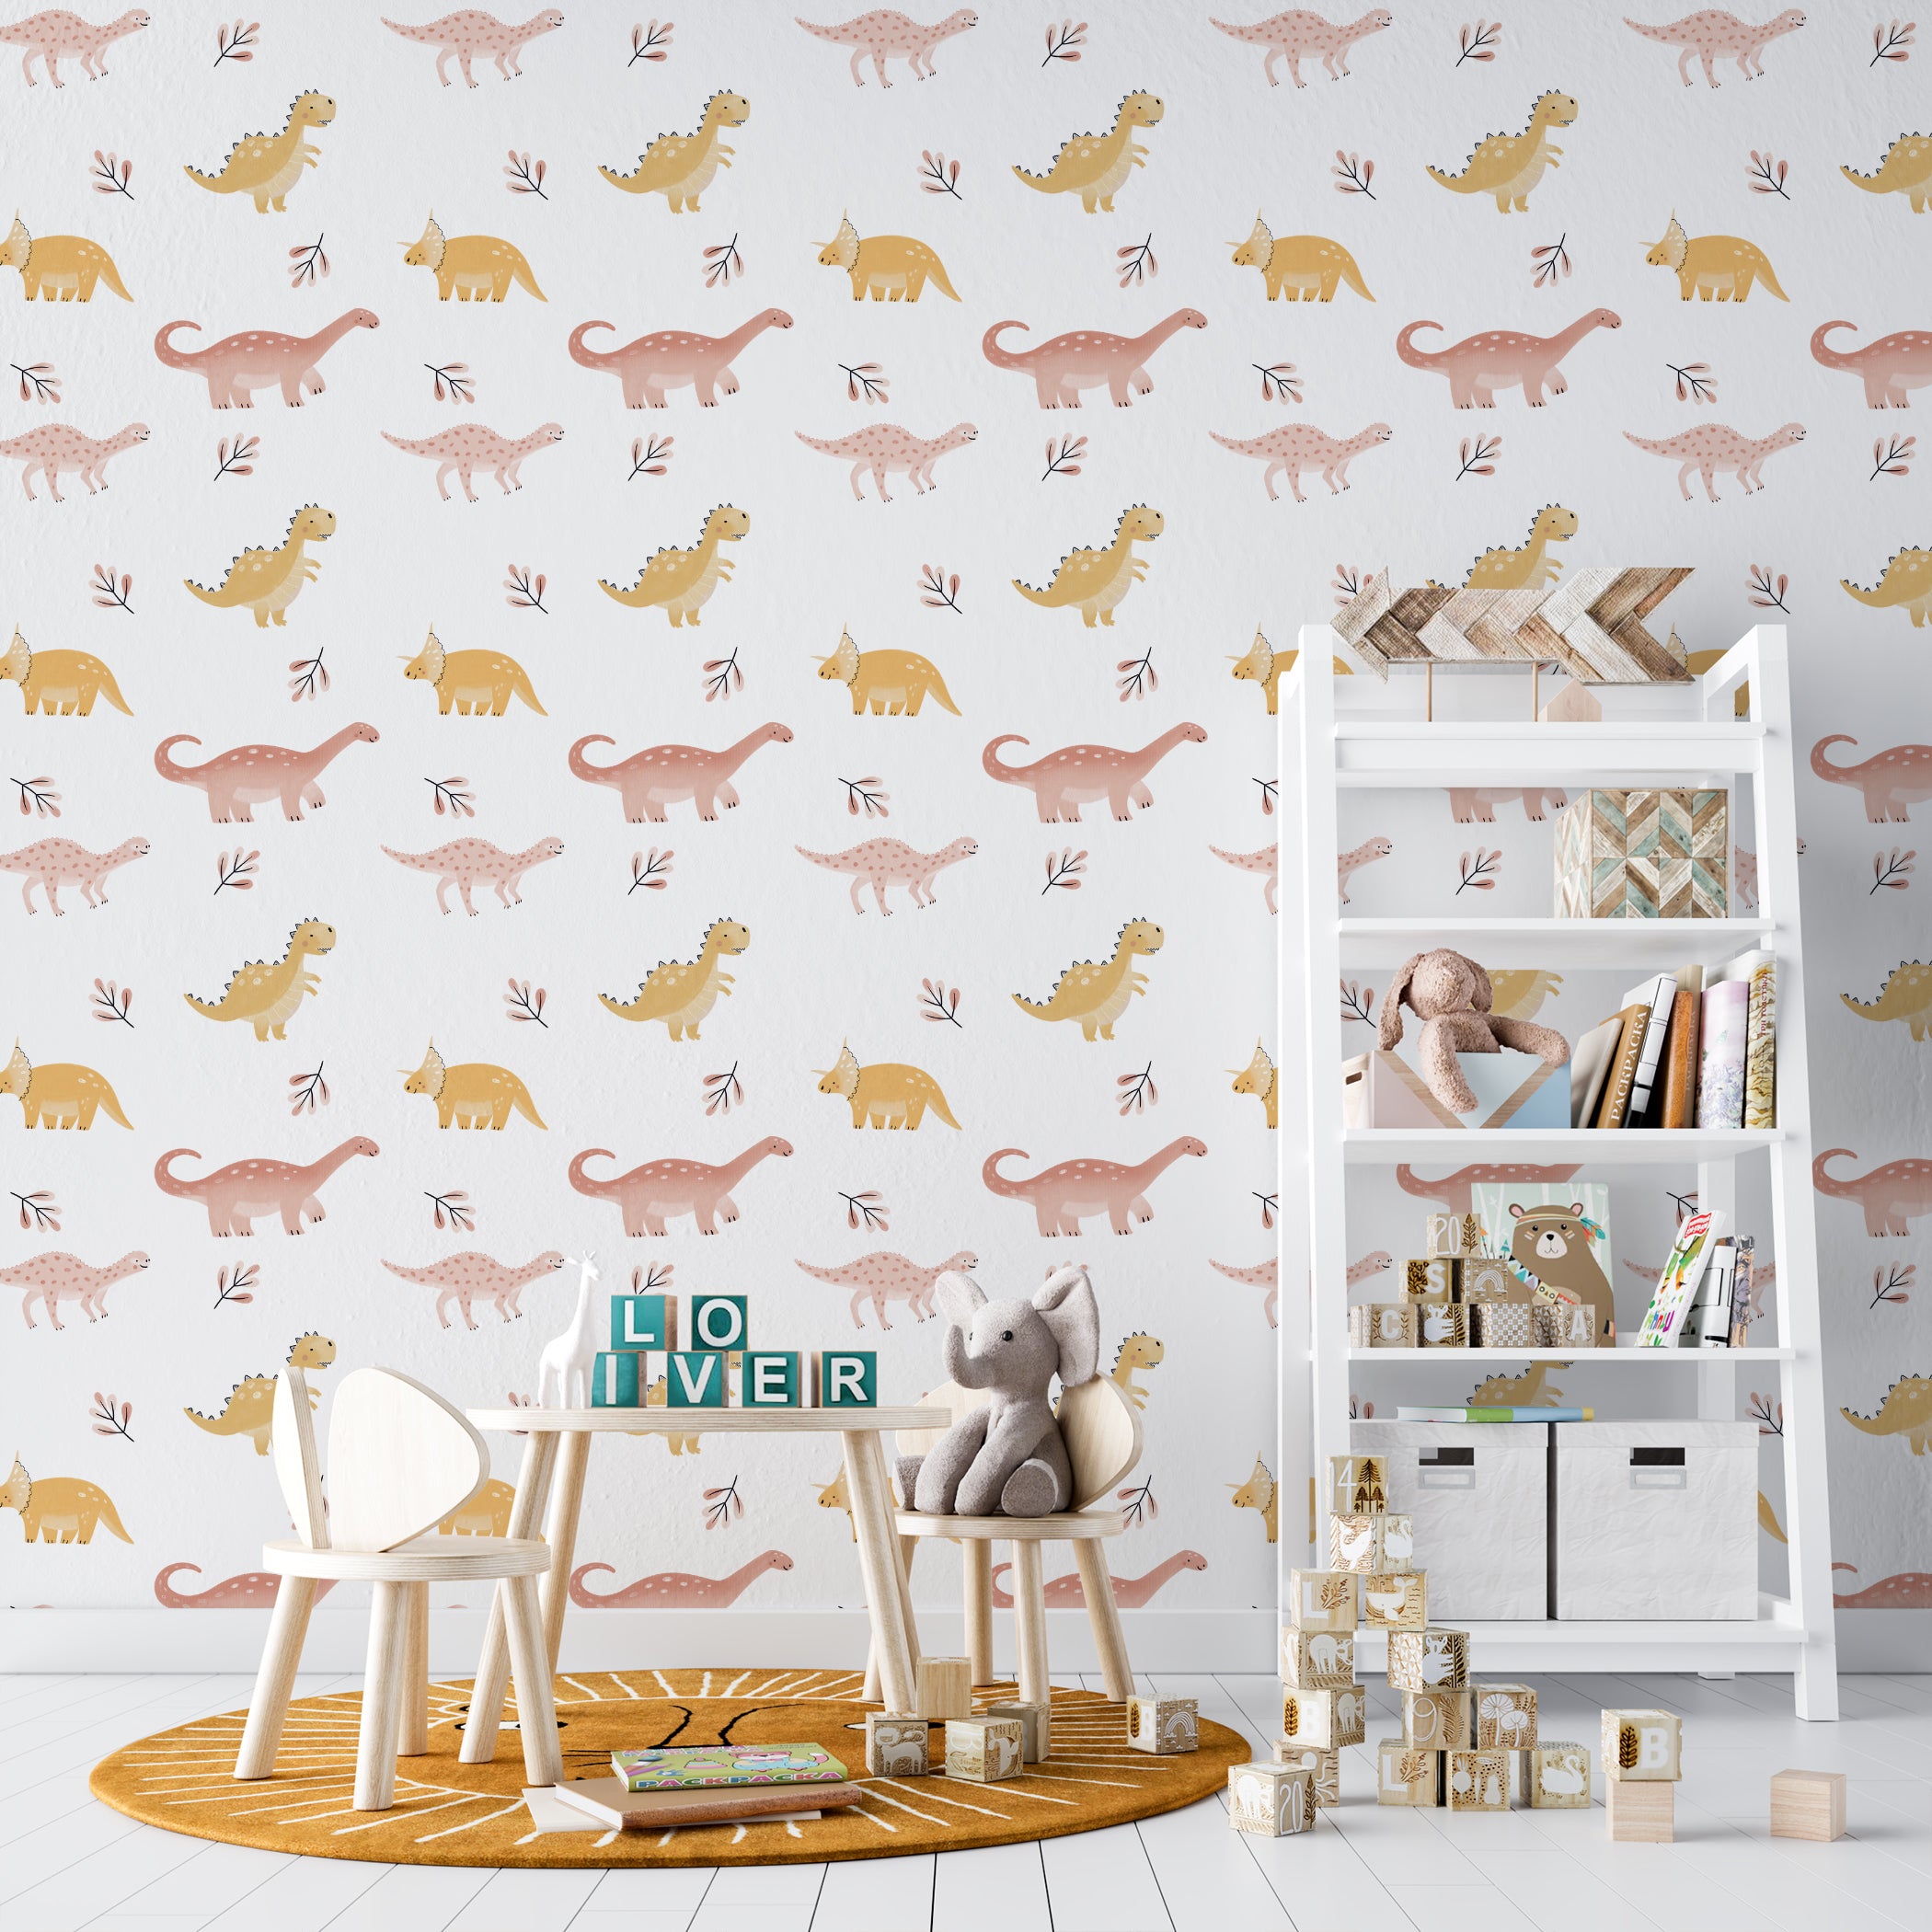 A child's play area is enhanced with the "Dino Days Wallpaper III," which shows cheerful dinosaurs in a soft color palette. The wallpaper includes adorable dinosaurs like stegosaurus and triceratops, interspersed with delicate plant motifs, creating a fun and educational backdrop for play and learning.